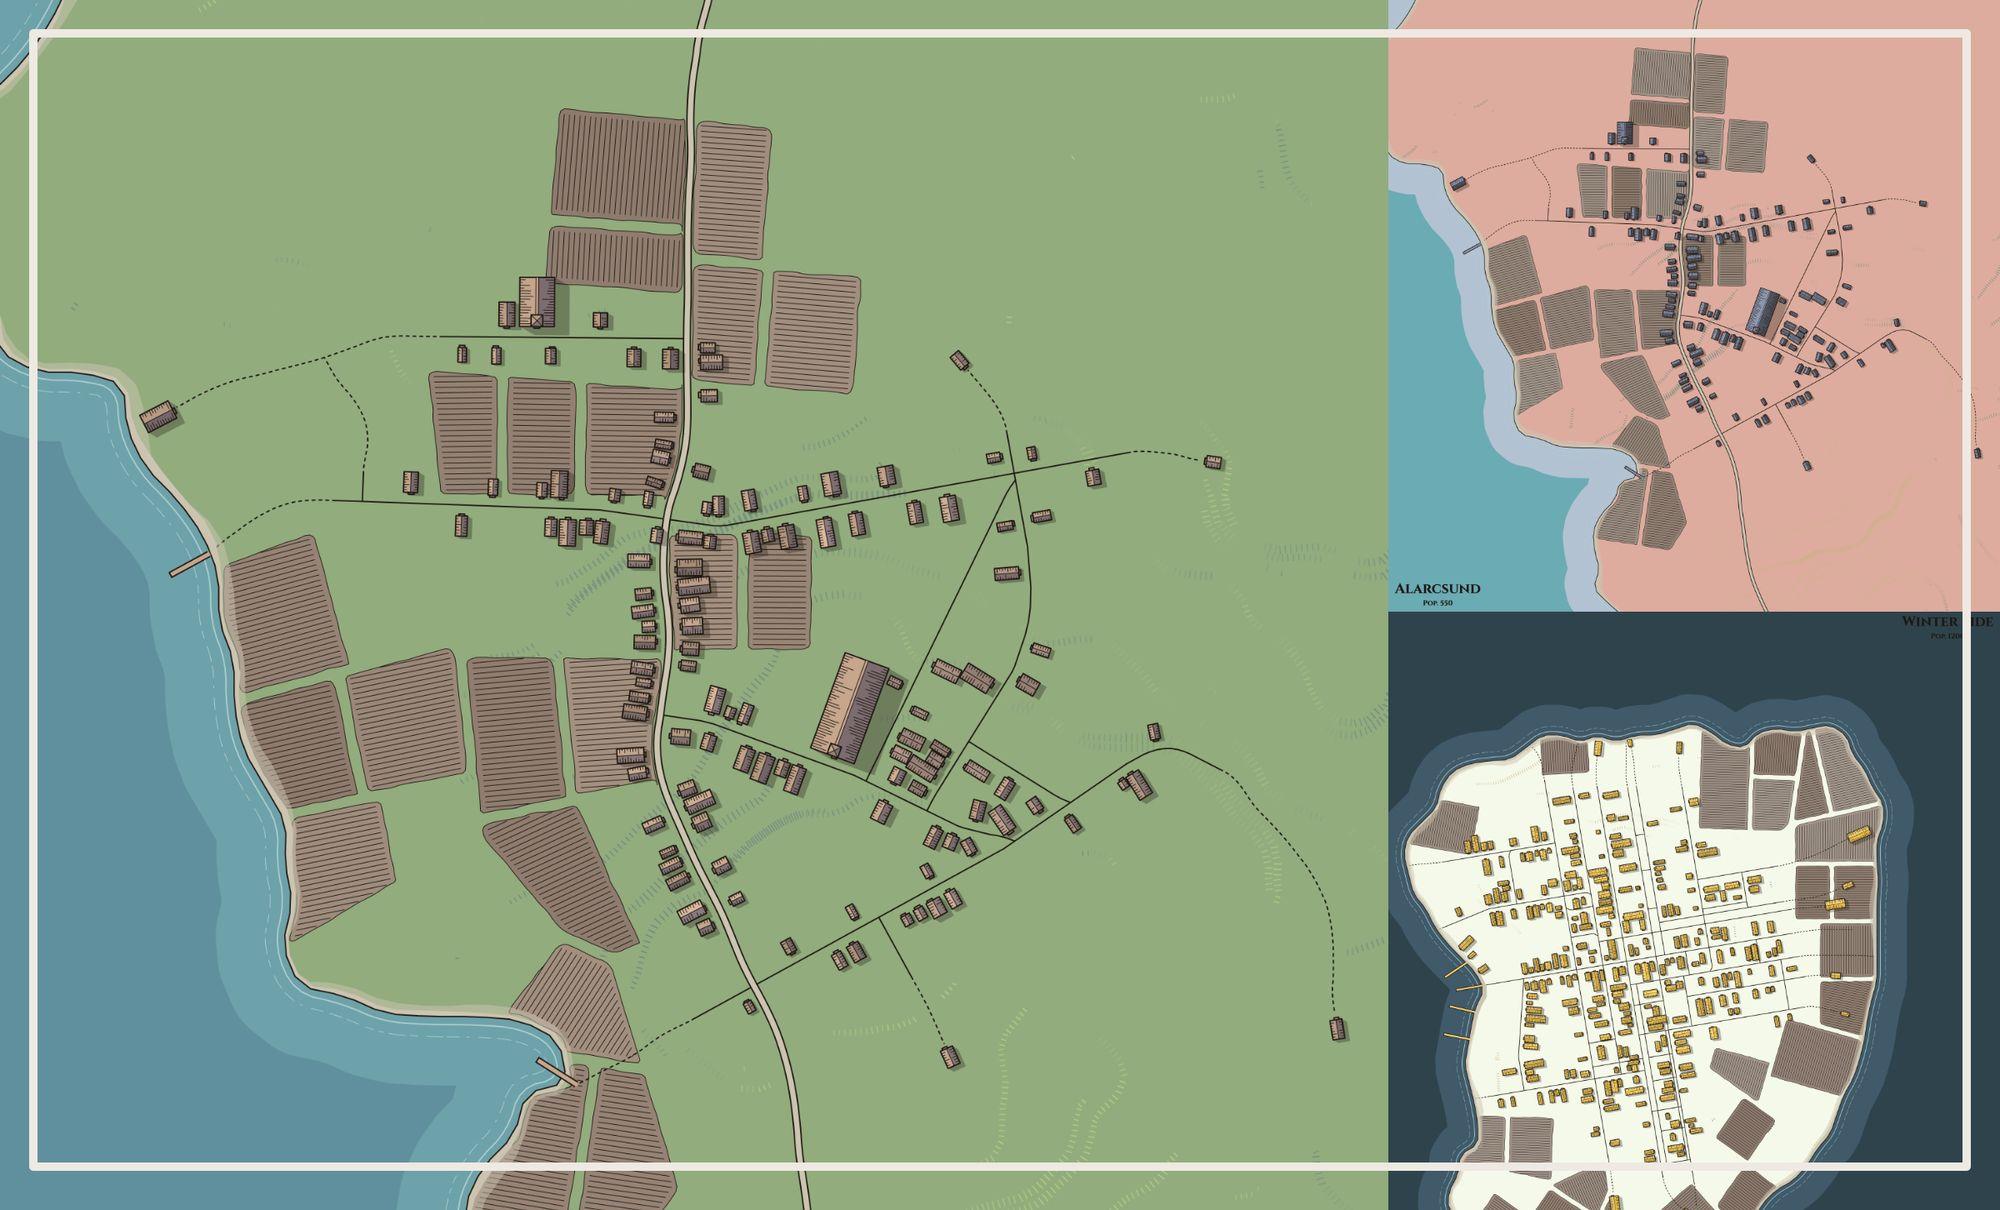 Generate your own town map with delightful colors in 5 minutes